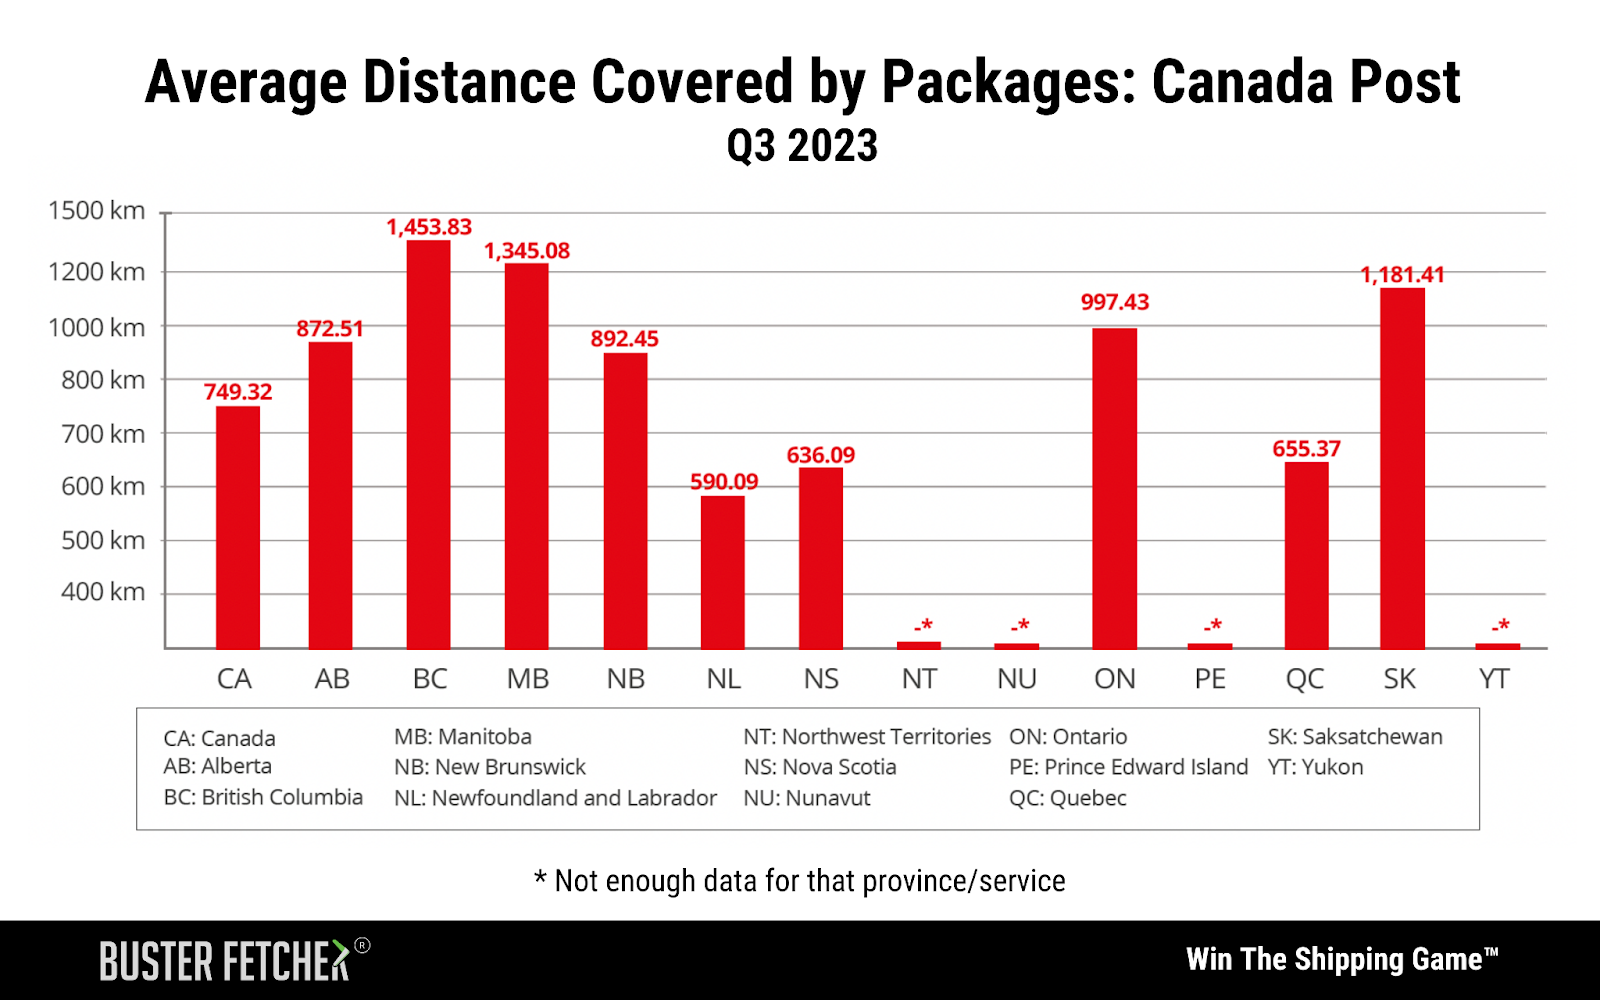 Average distande covered by packages from Canada Post 2023